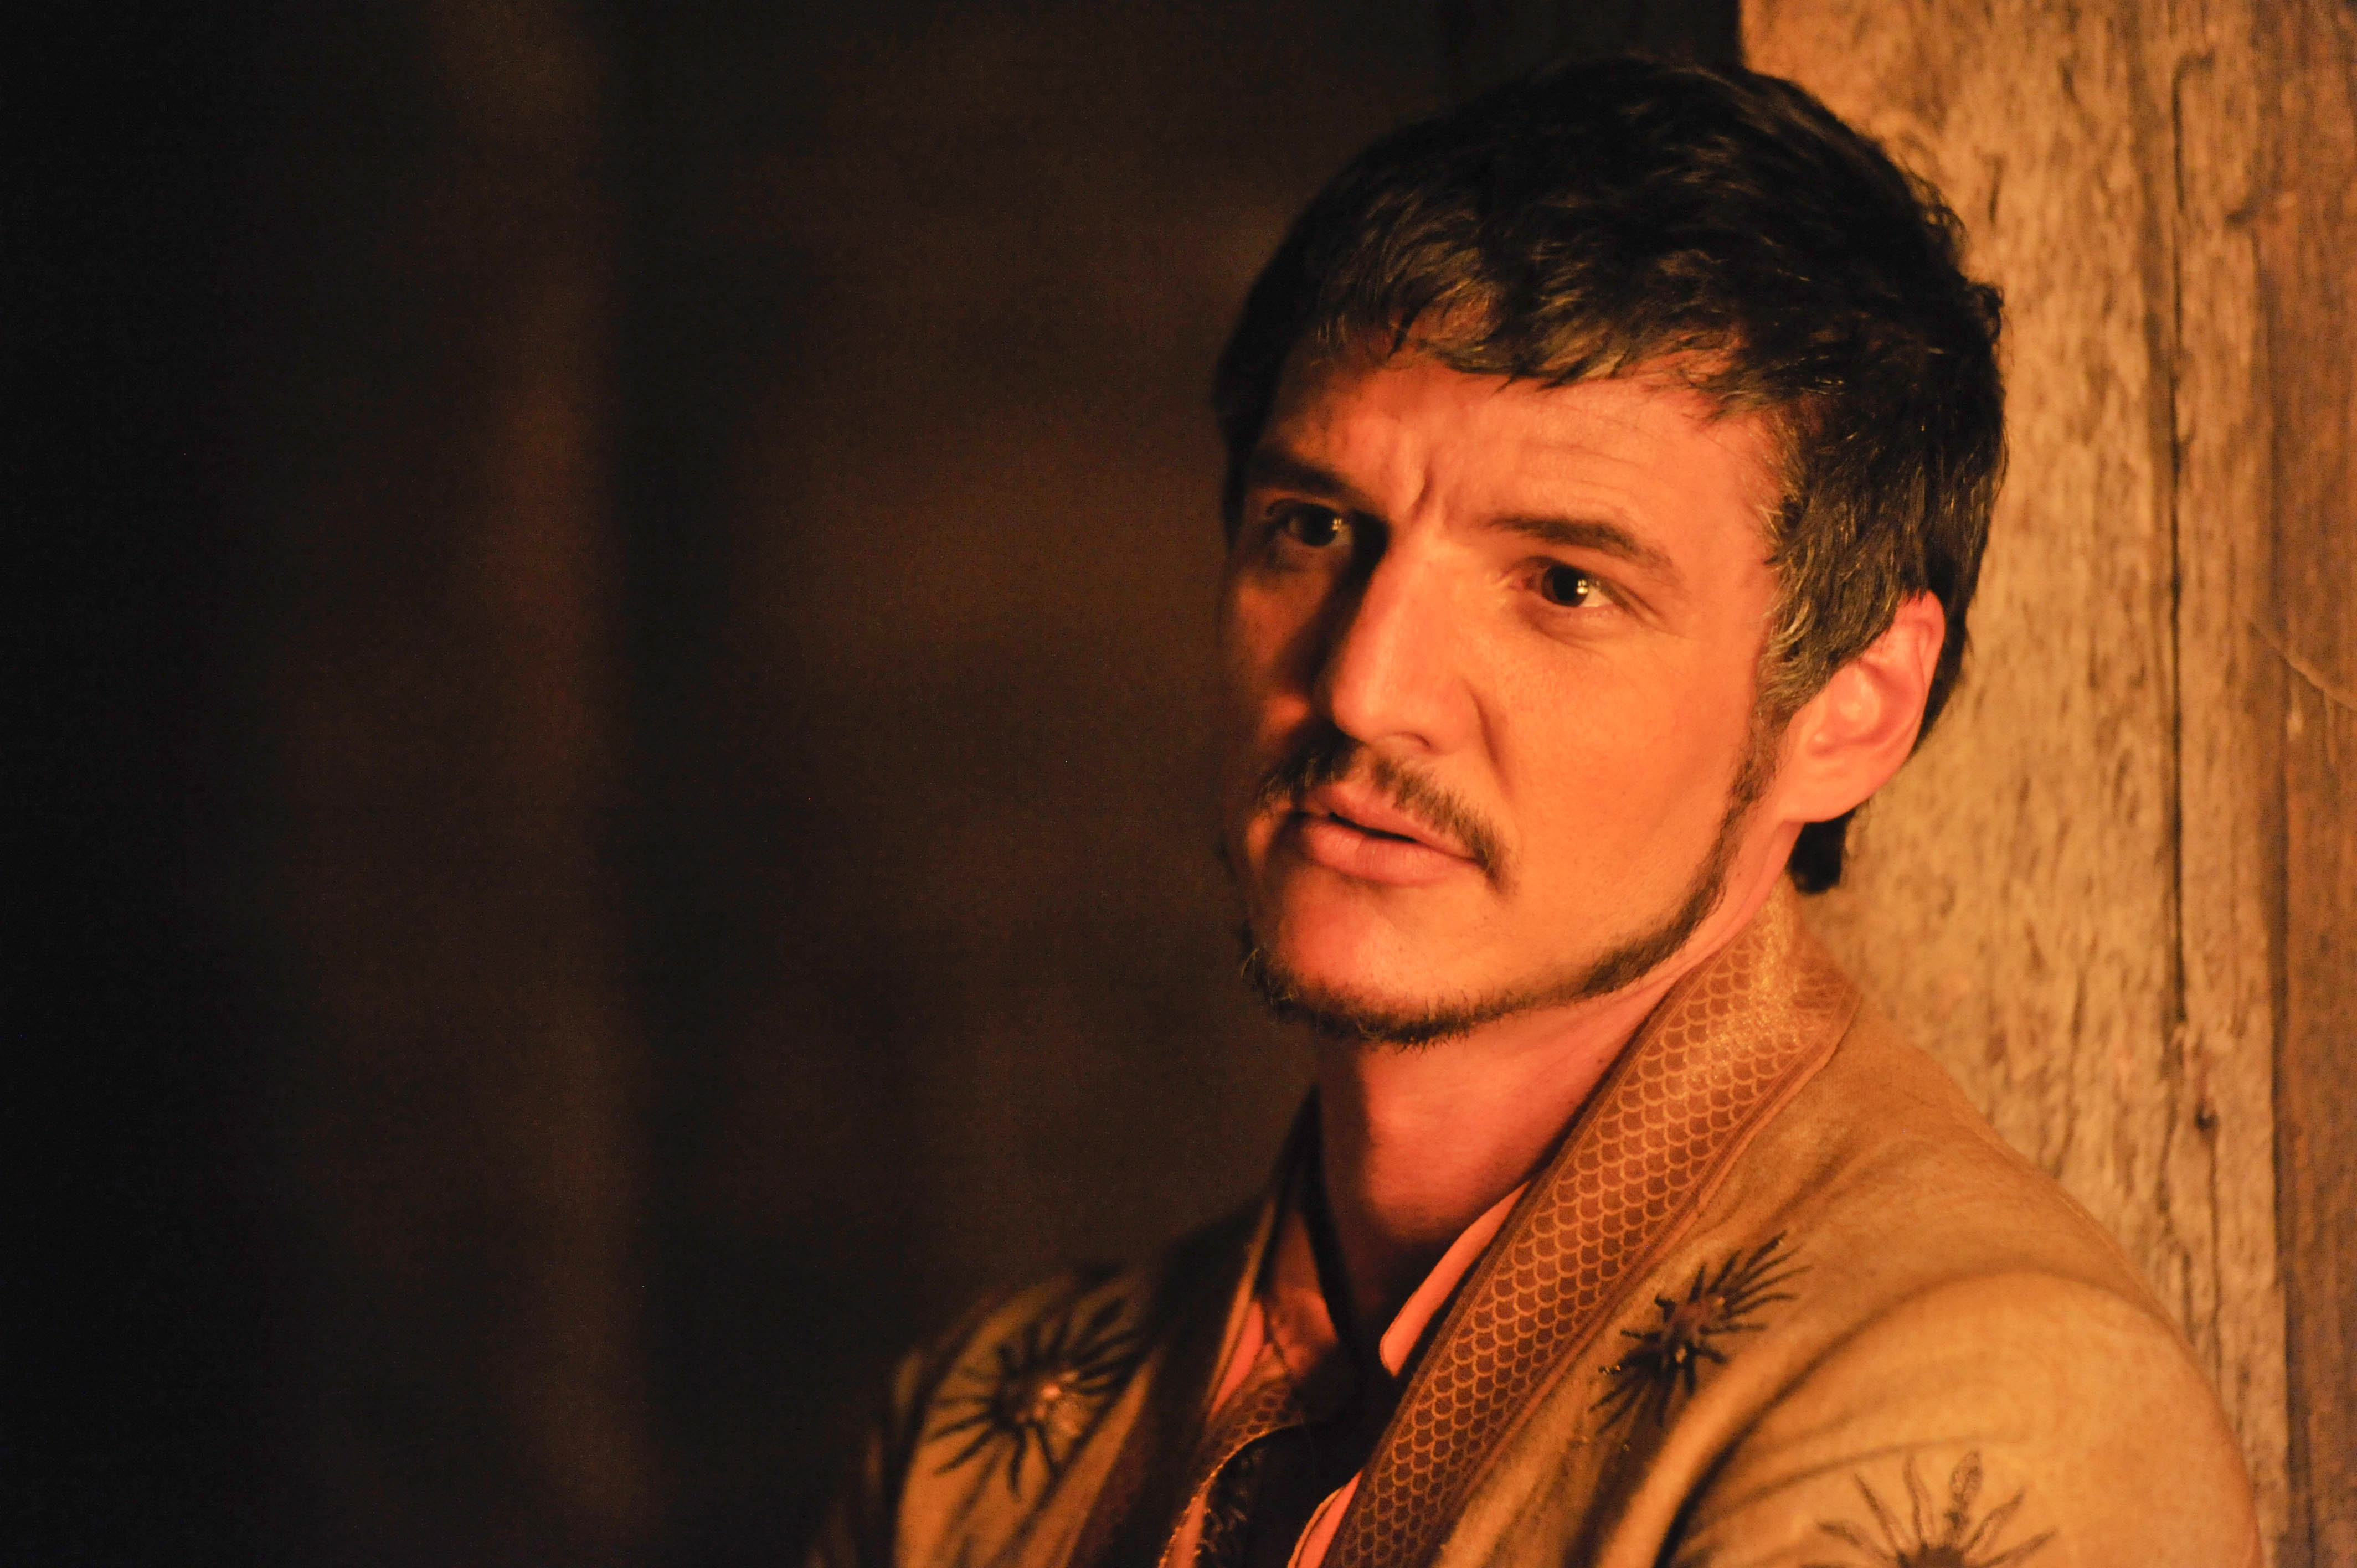 oberyn martell, tv show, game of thrones, pedro pascal